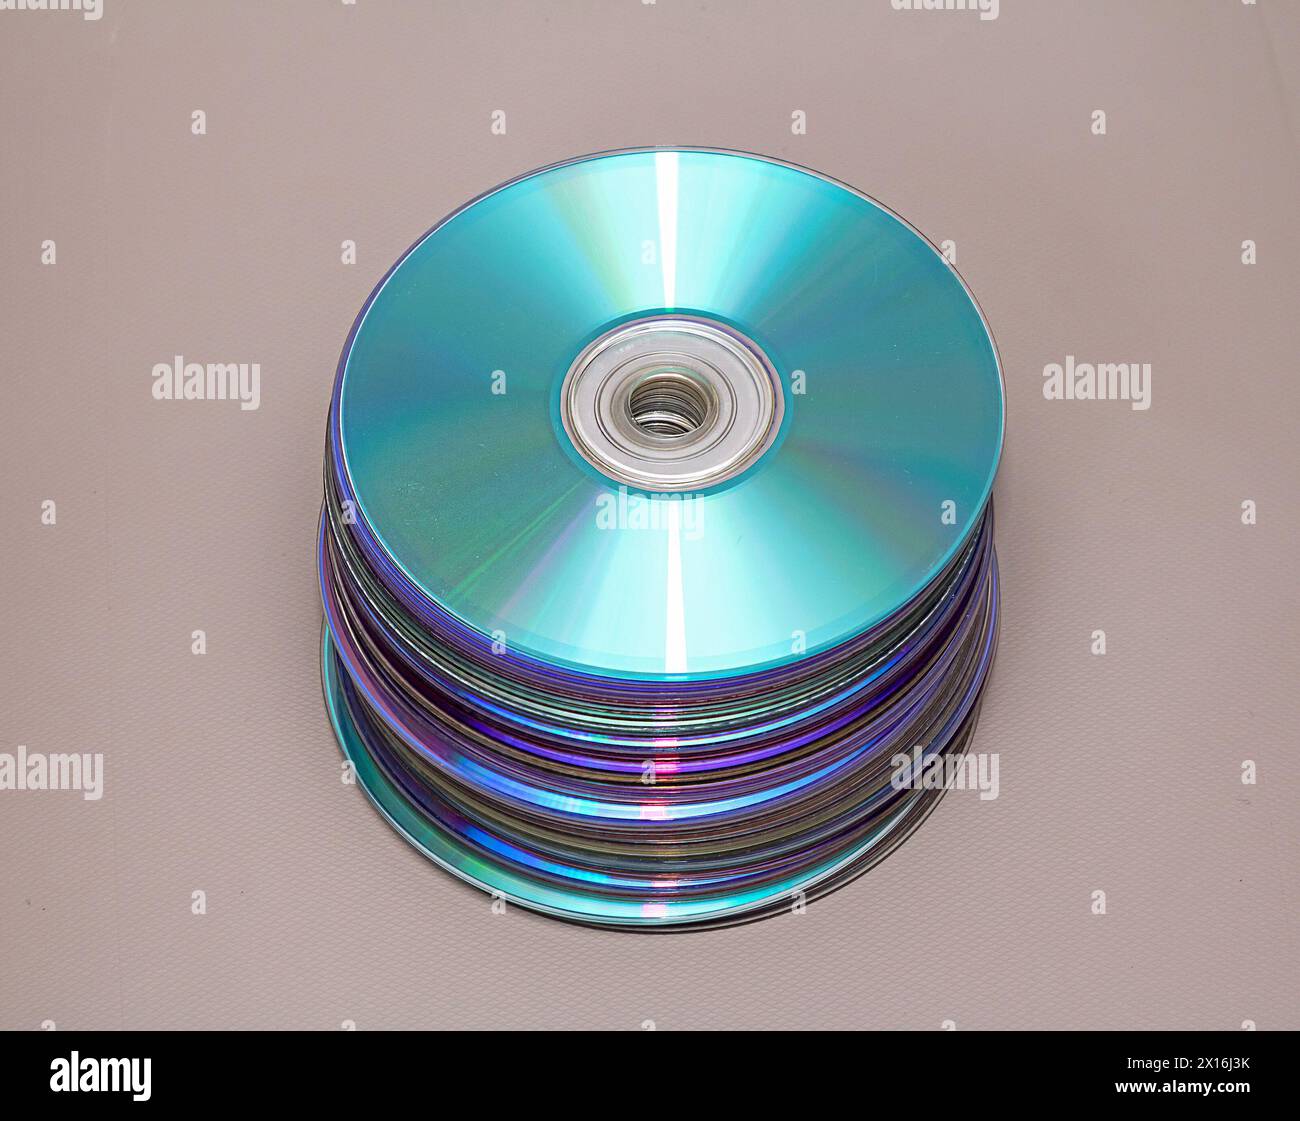 Stack of CD discs on table with white background Stock Photo